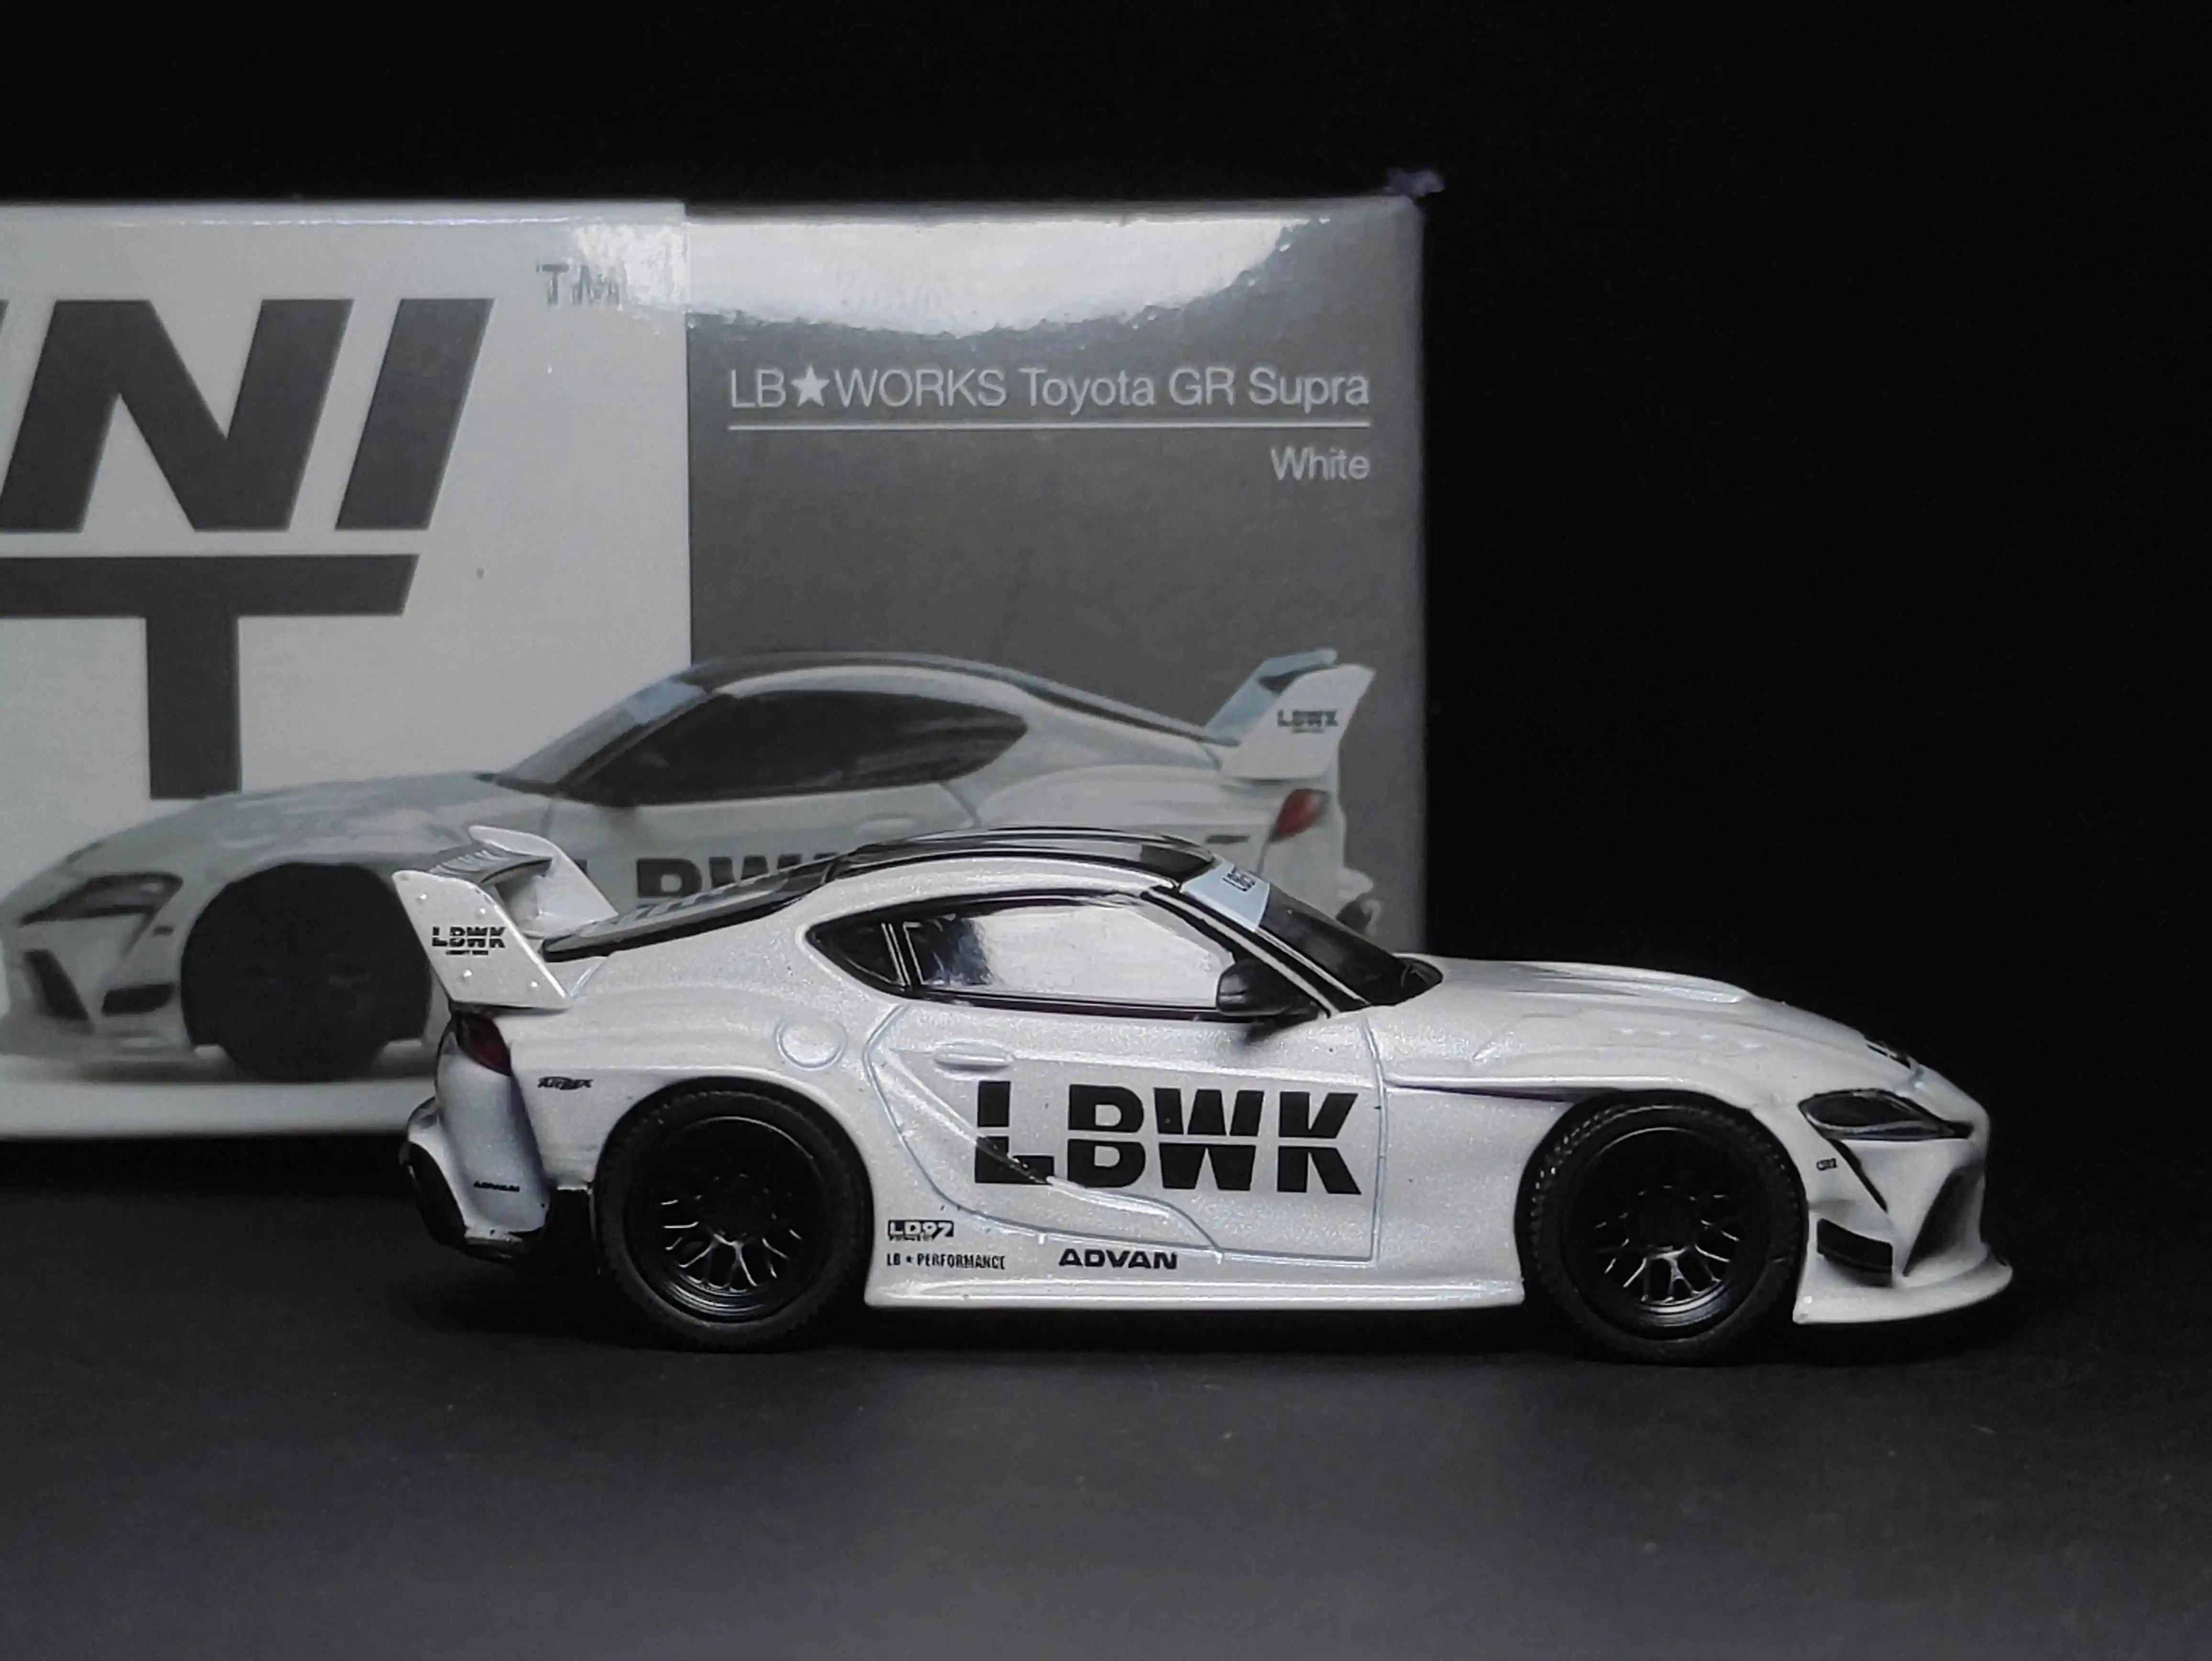 

HeyToys Mini GT 1/64 235 LB WORKS Toyota GR Supra DieCast Model Car Collection Limited Edition